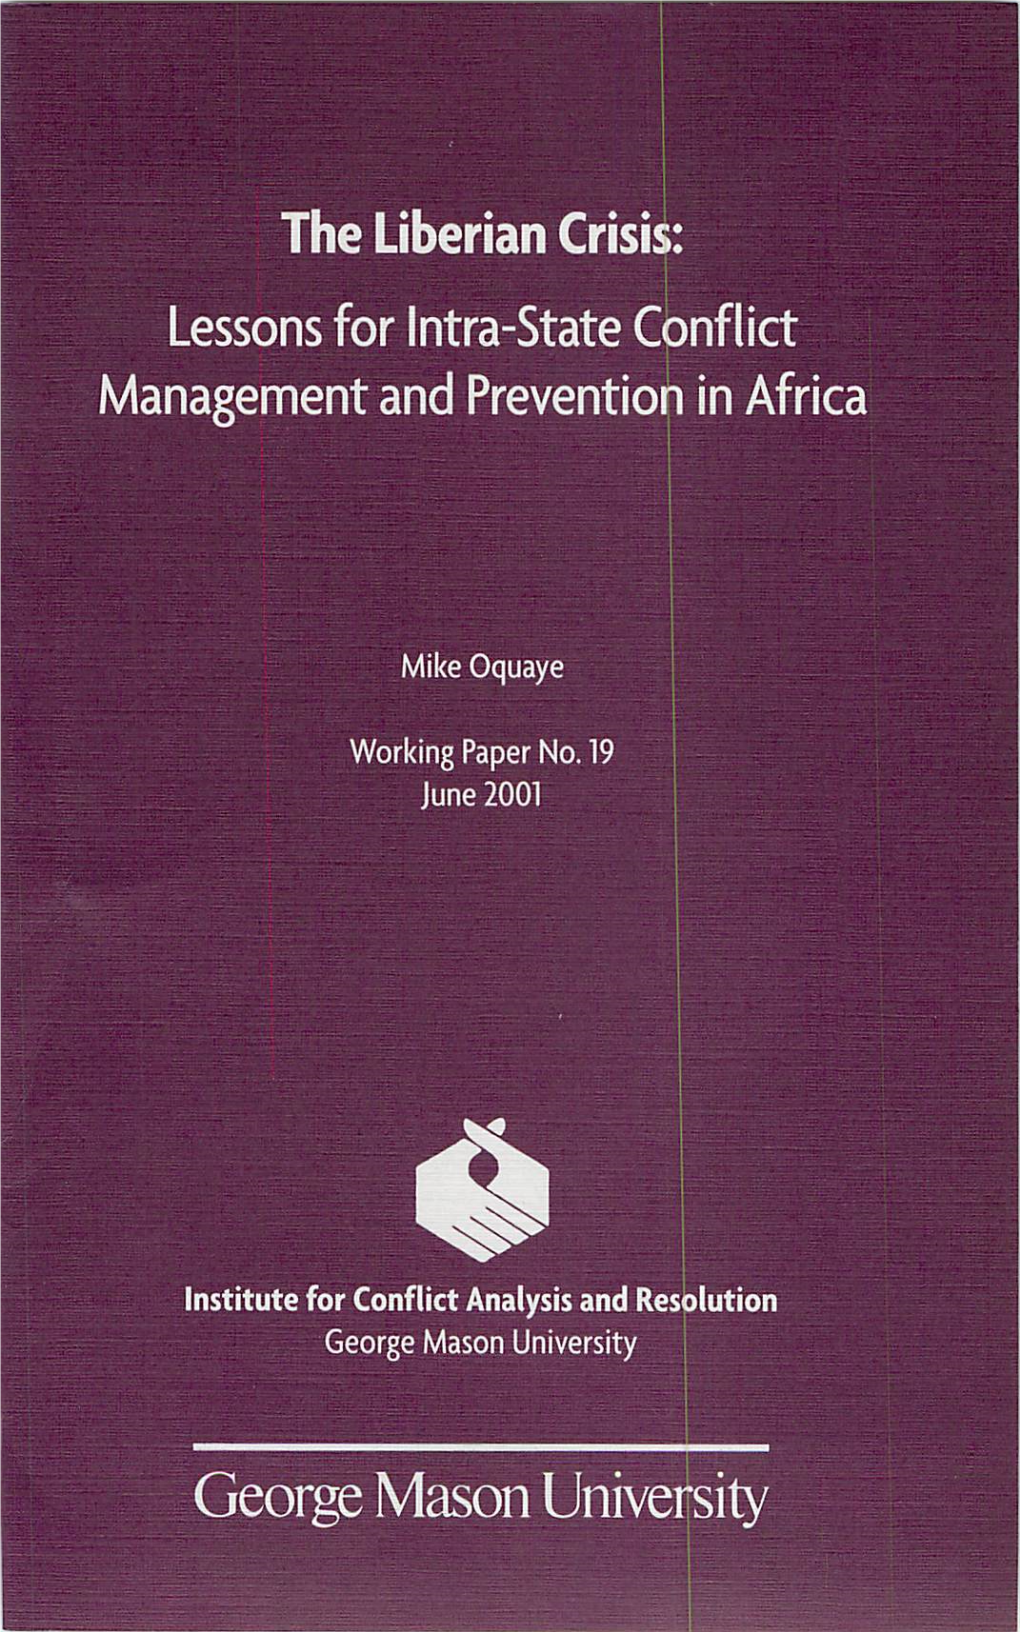 The Liberian Crisis: Lessons for Intra-State Conflict Management and Prevention in Africa